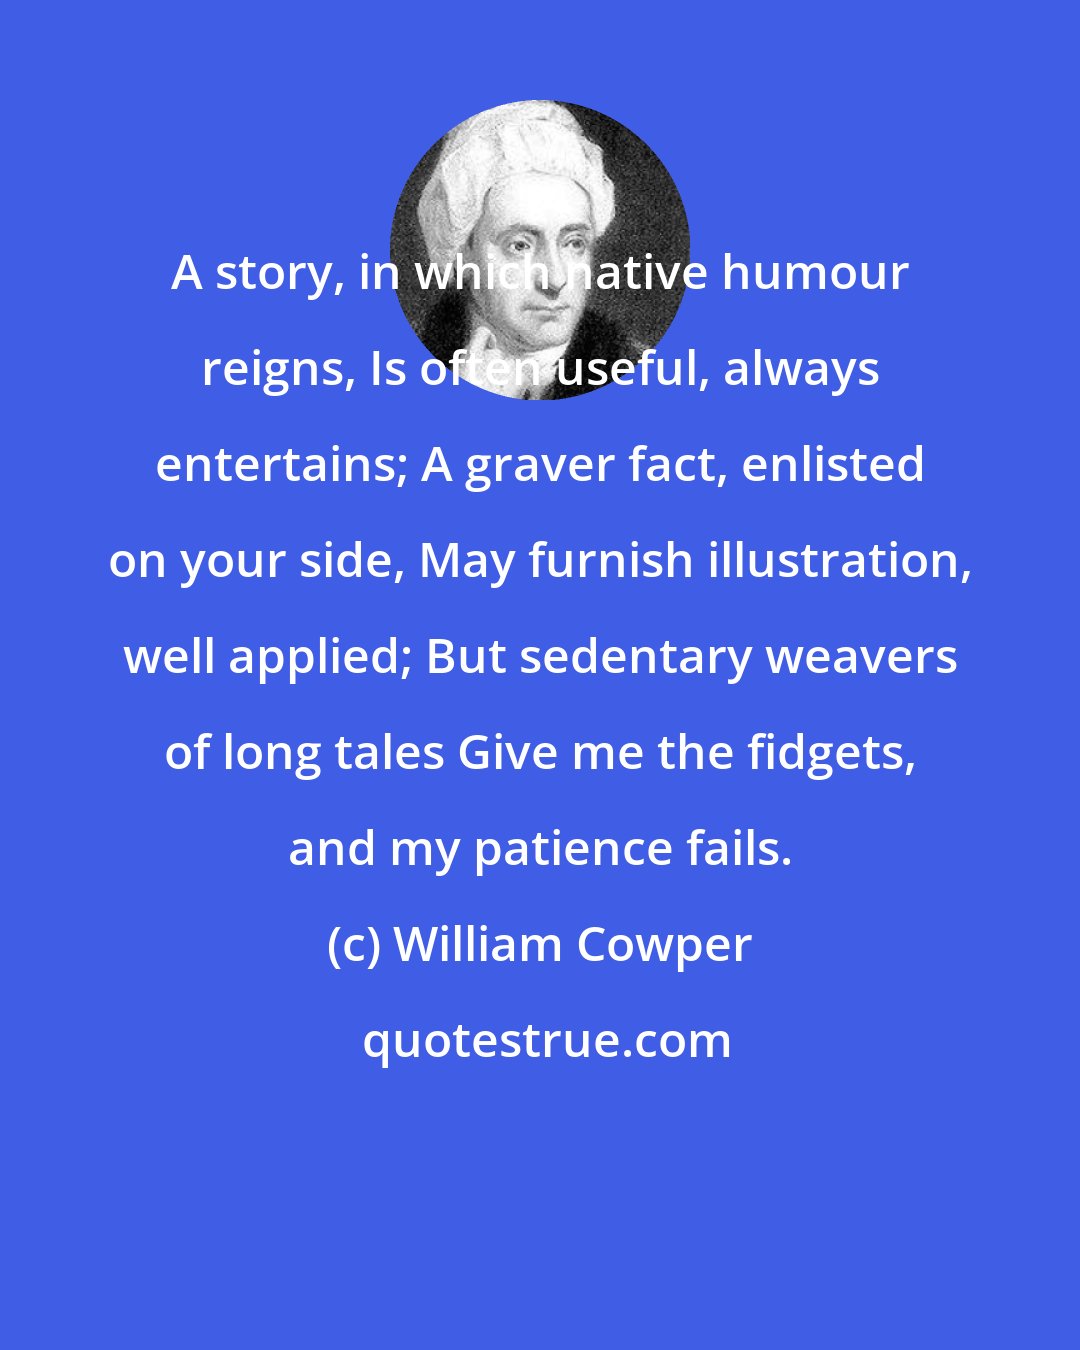 William Cowper: A story, in which native humour reigns, Is often useful, always entertains; A graver fact, enlisted on your side, May furnish illustration, well applied; But sedentary weavers of long tales Give me the fidgets, and my patience fails.